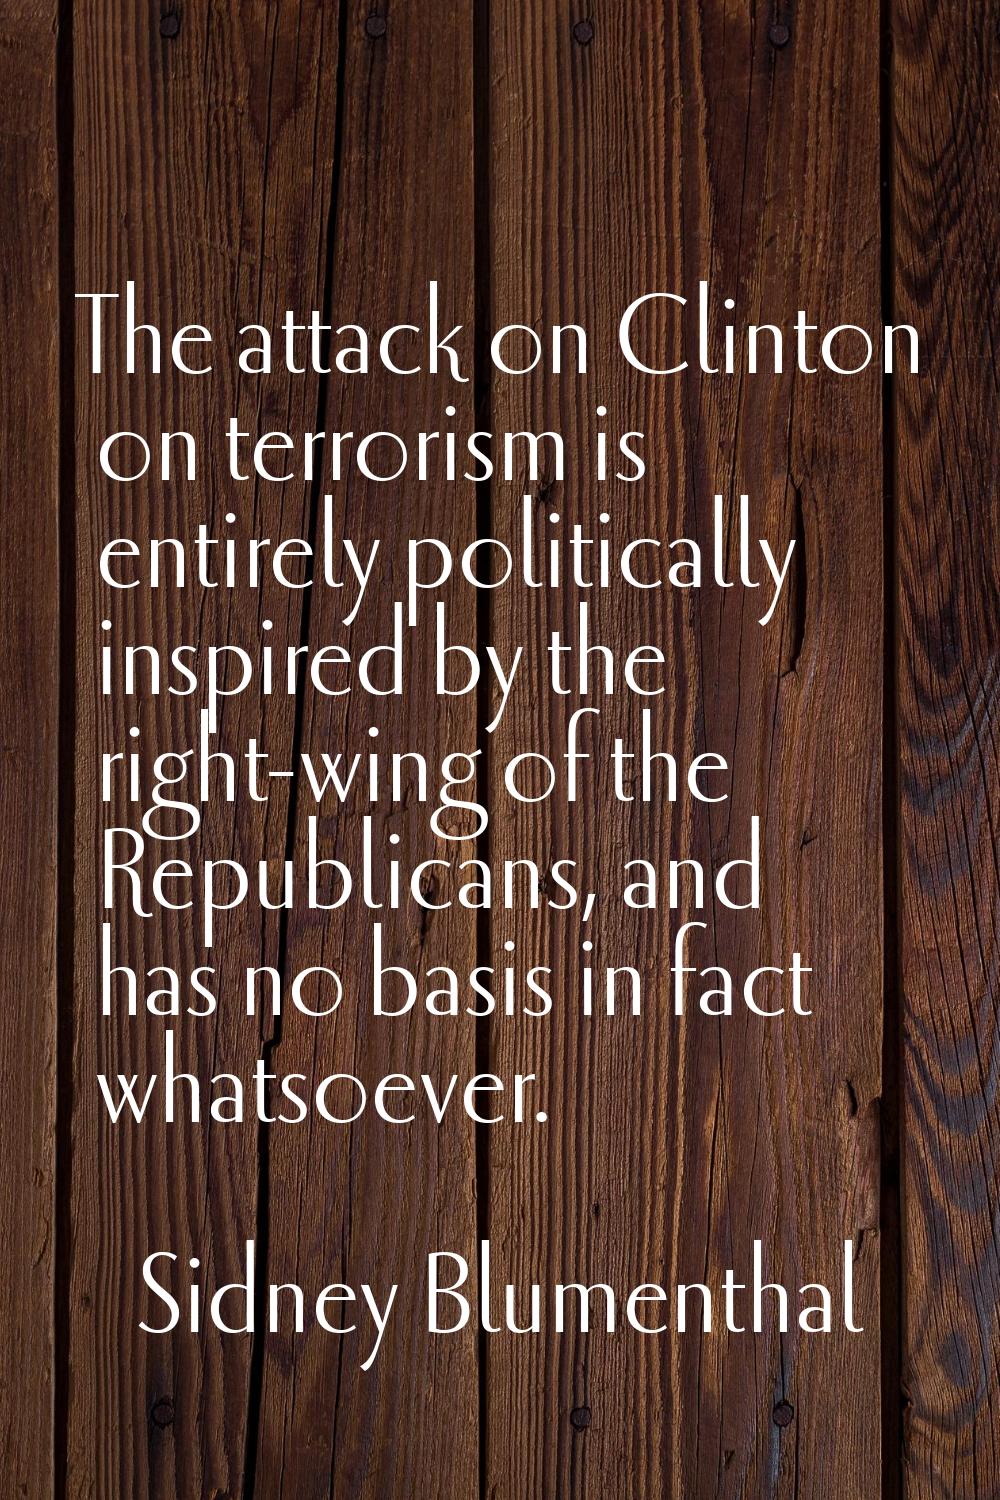 The attack on Clinton on terrorism is entirely politically inspired by the right-wing of the Republ